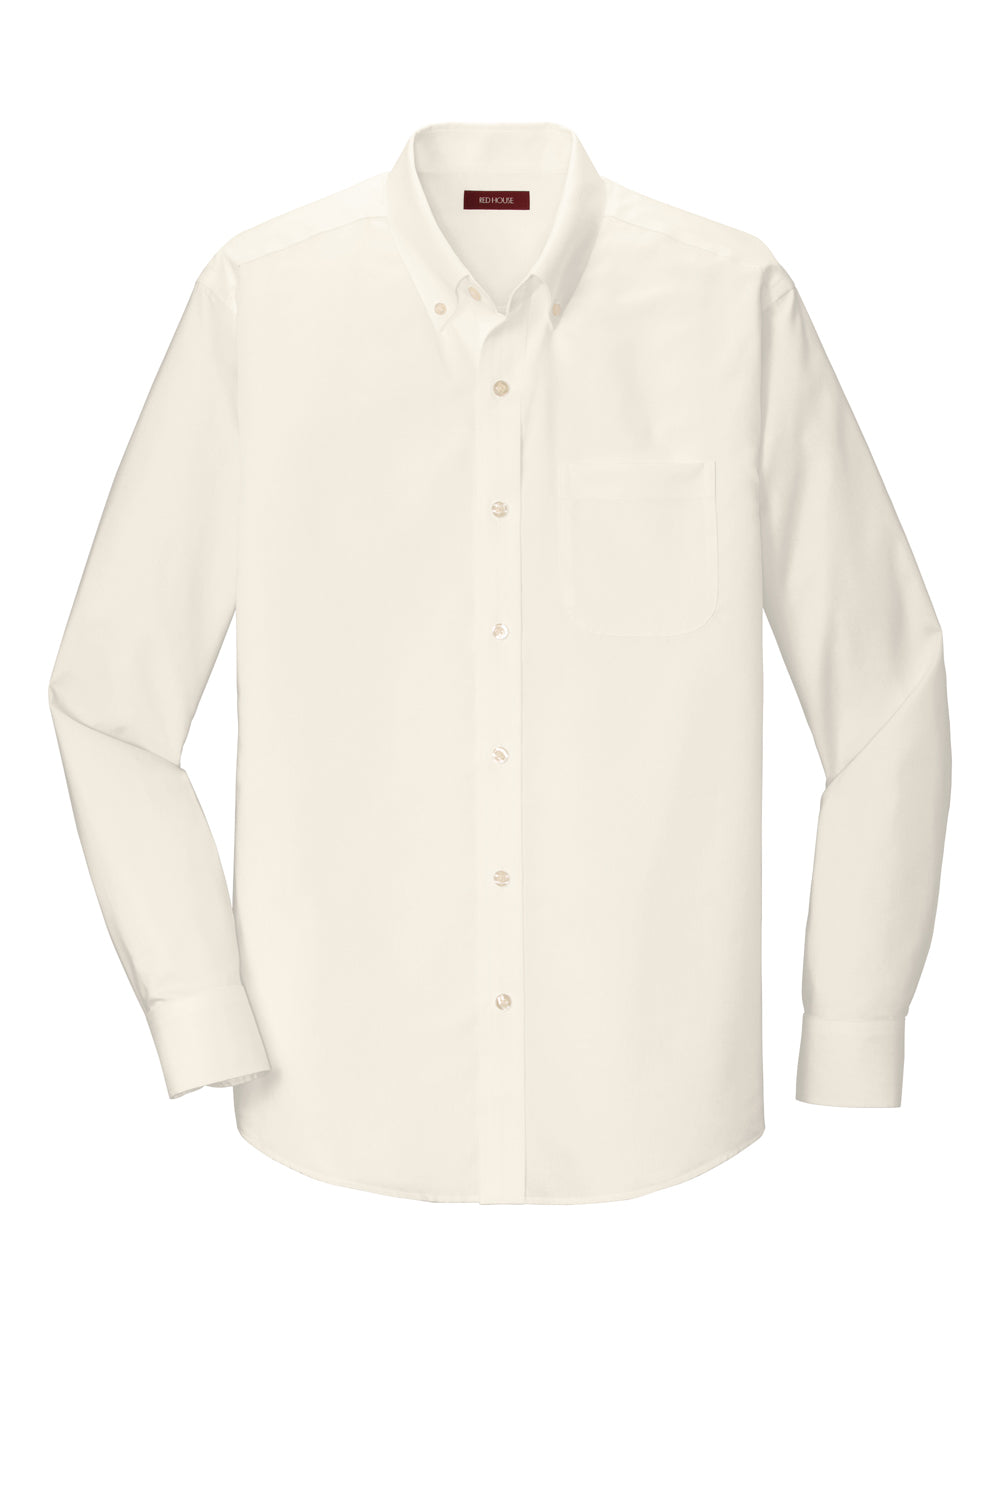 Red House RH240/TLRH240 Mens Pinpoint Oxford Wrinkle Resistant Long Sleeve Button Down Shirt w/ Pocket Ivory Chiffon White Flat Front